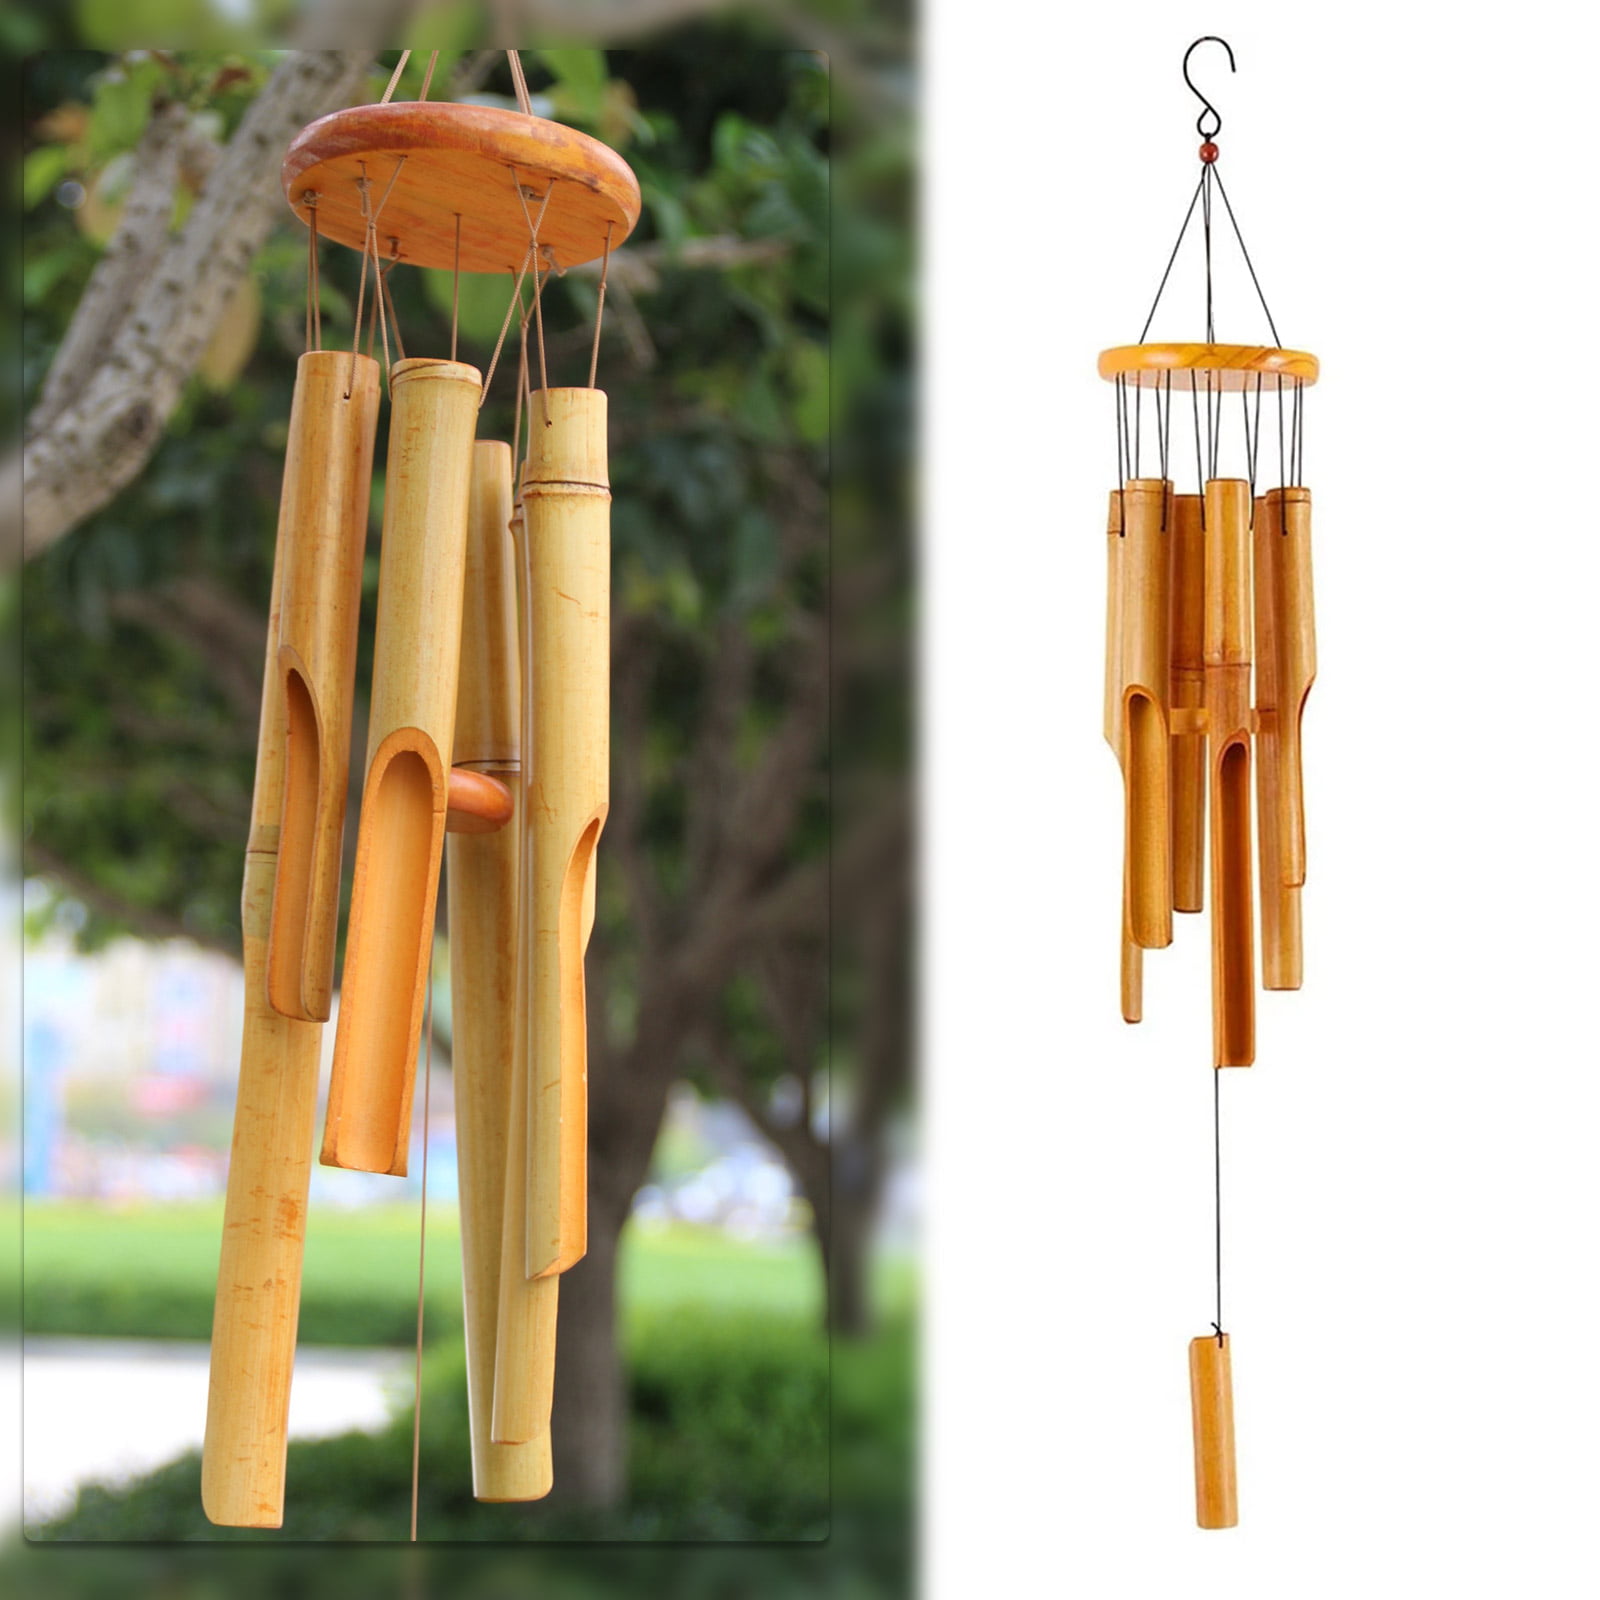 Hom Mumtop Bamboo Wind Chime Outdoor Wooden Music Wind Chimes For Garden Patio 